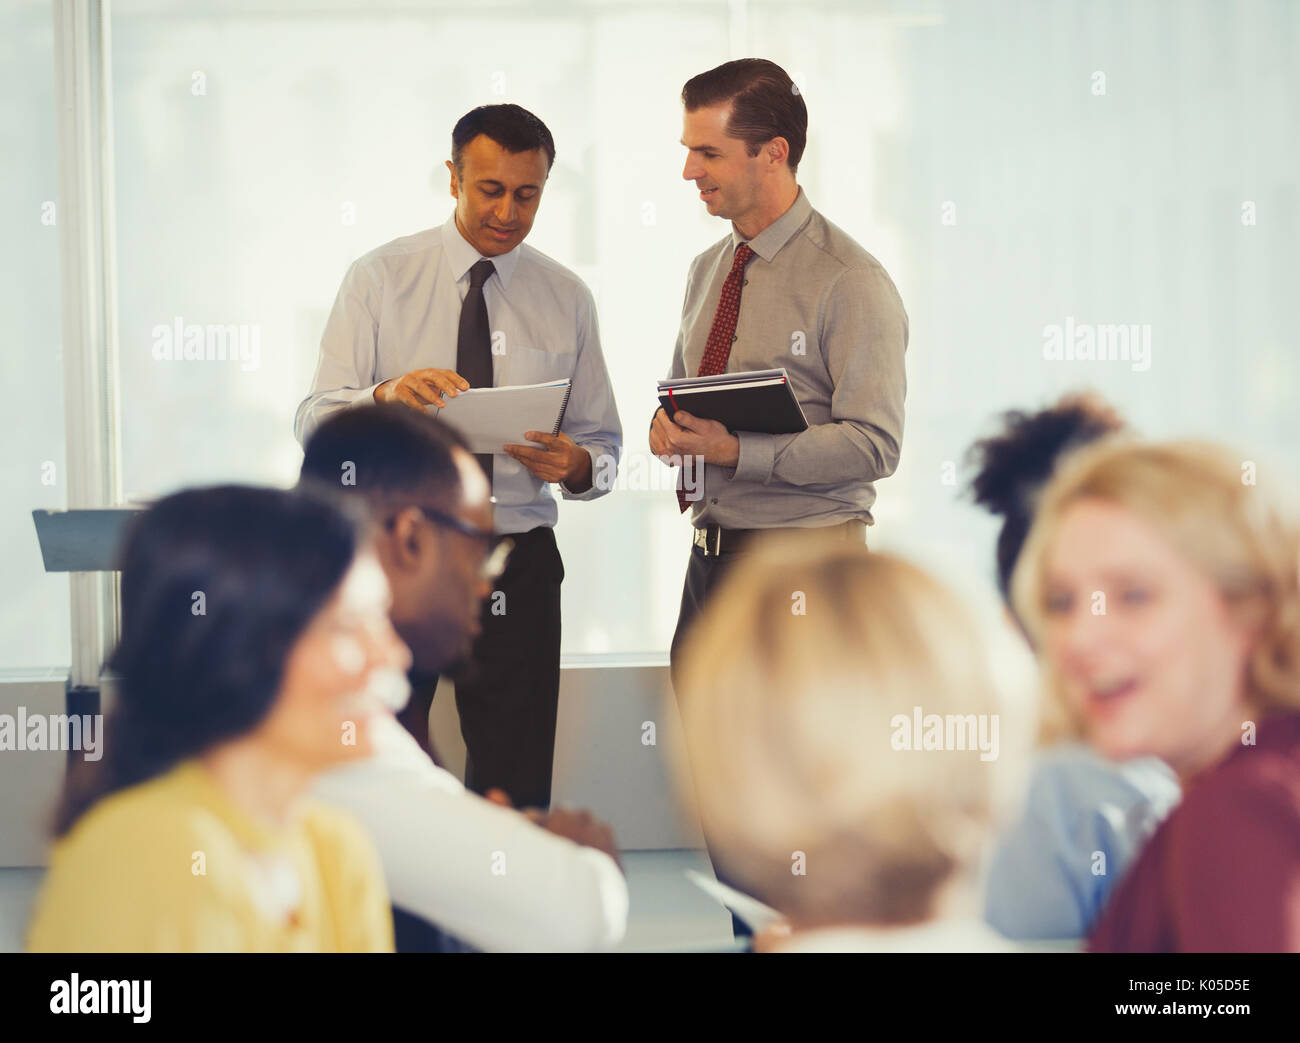 Businessmen discussing paperwork at conference Stock Photo